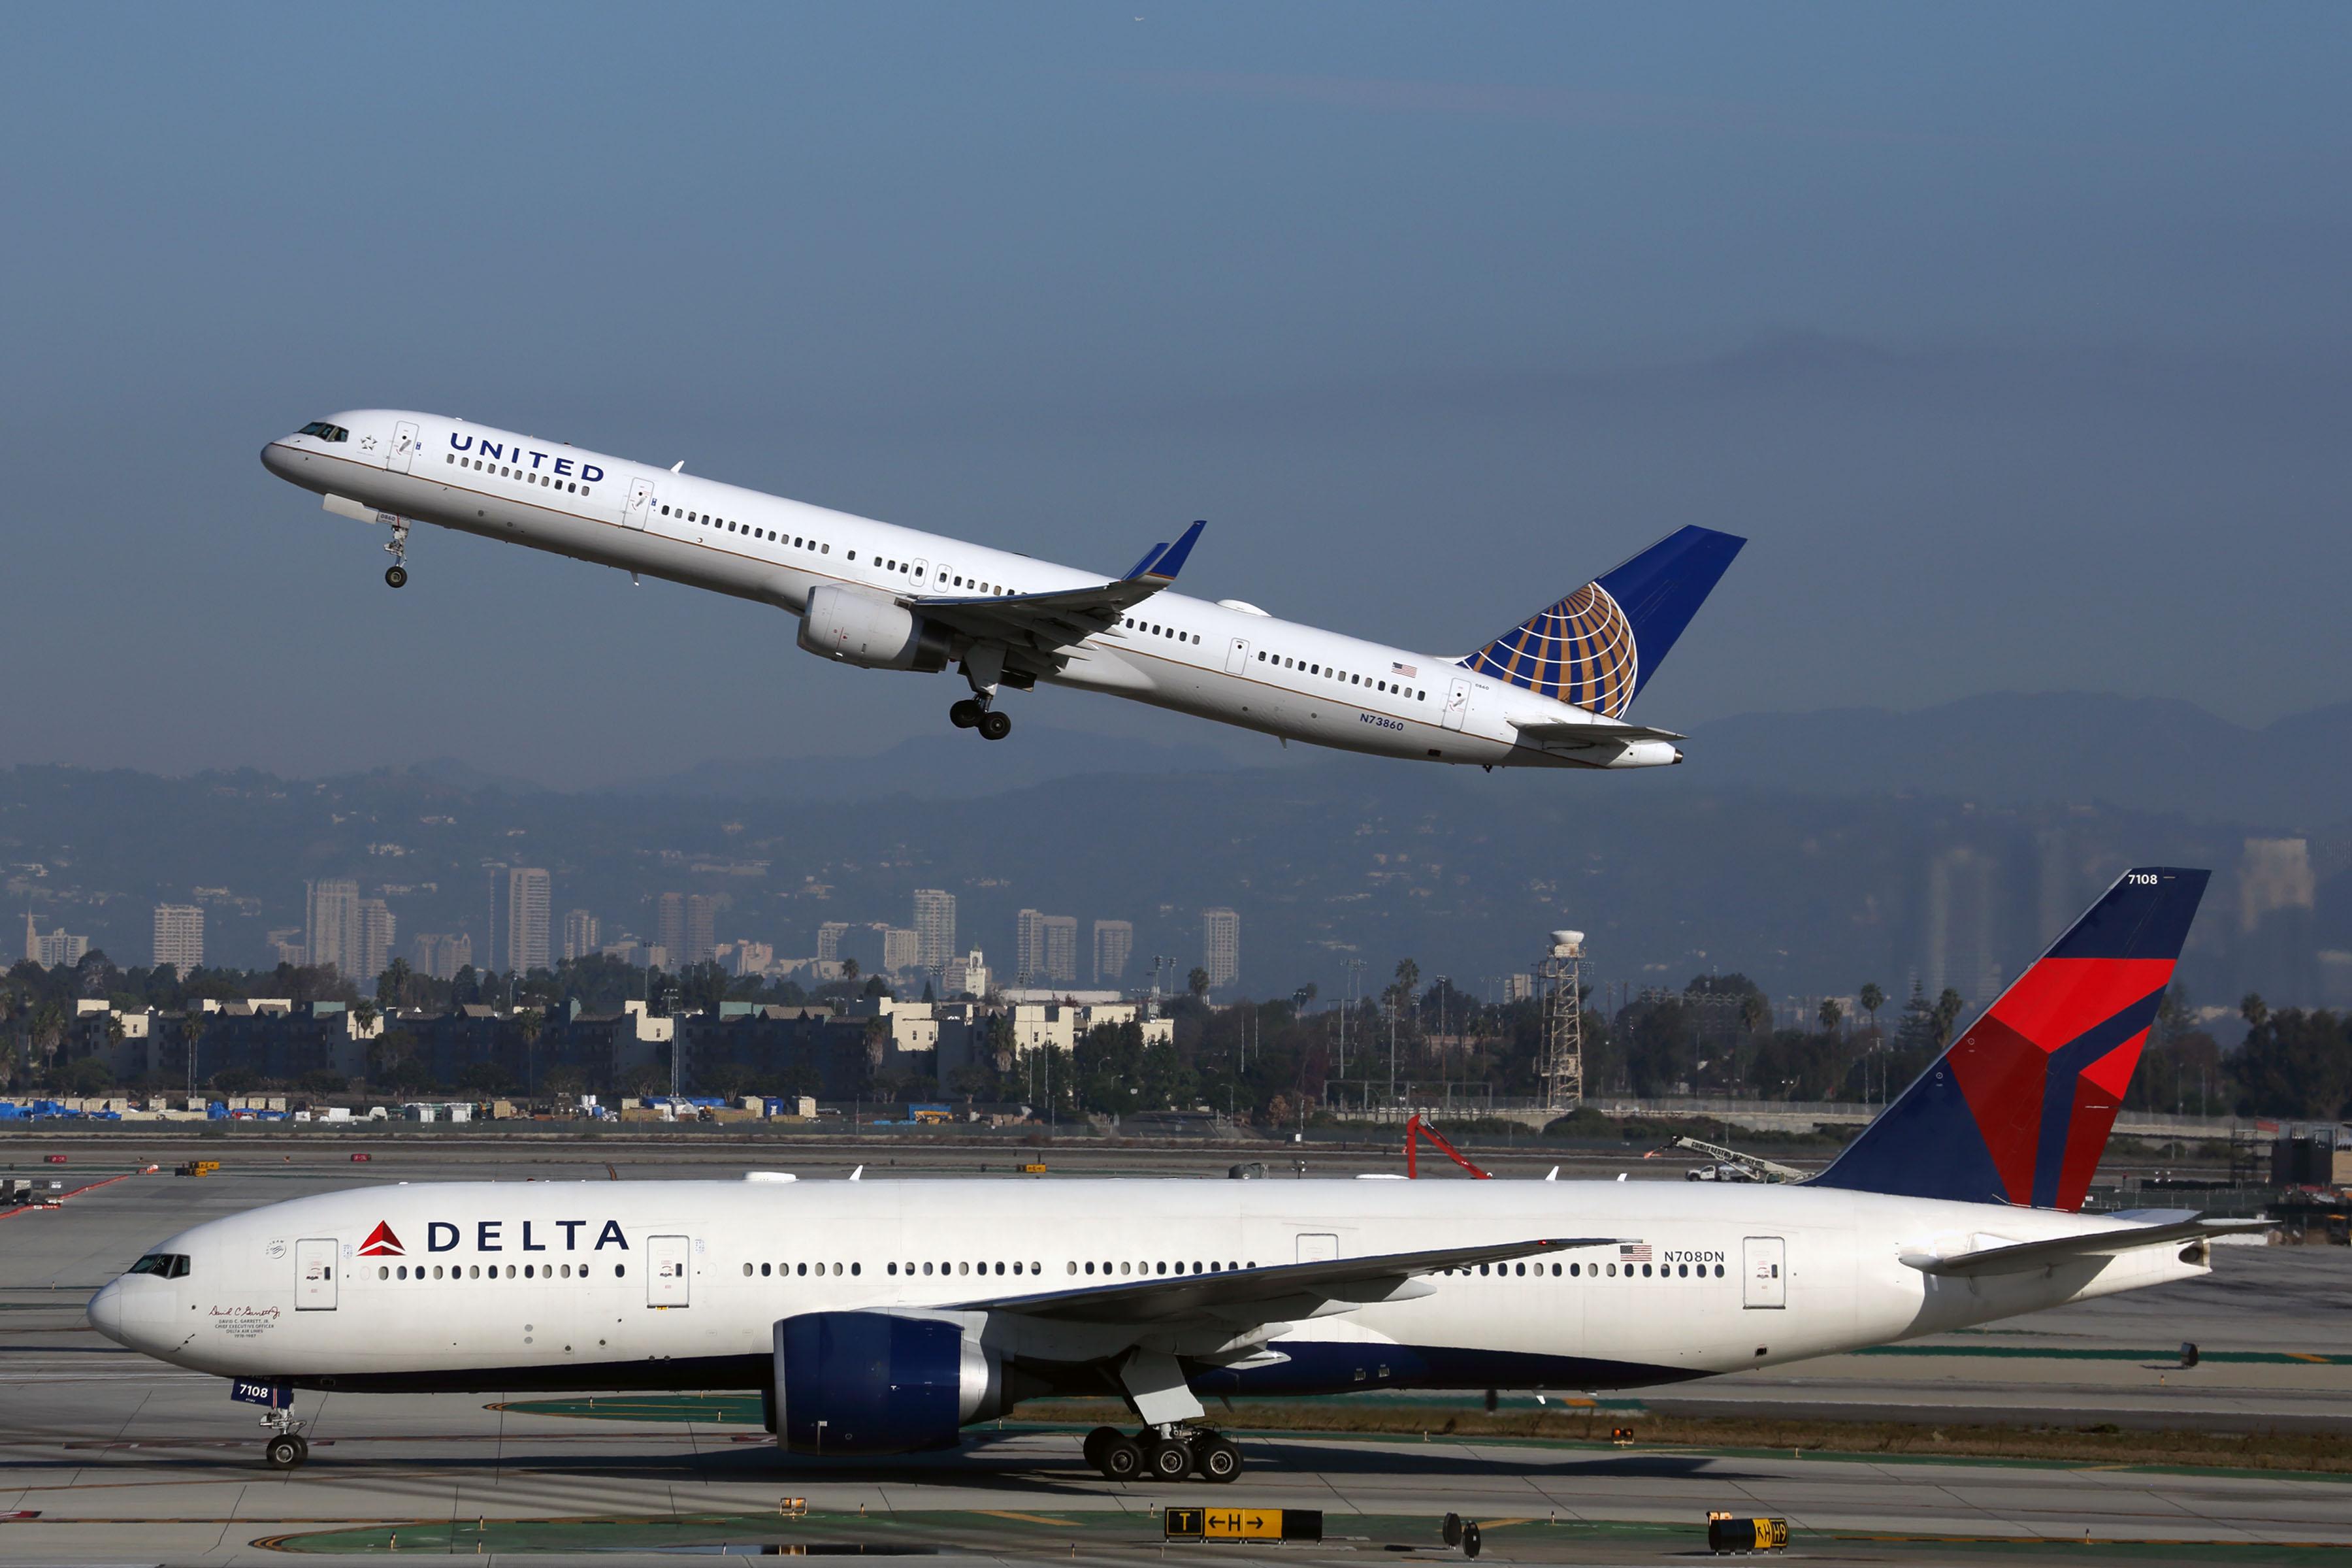 United and Delta